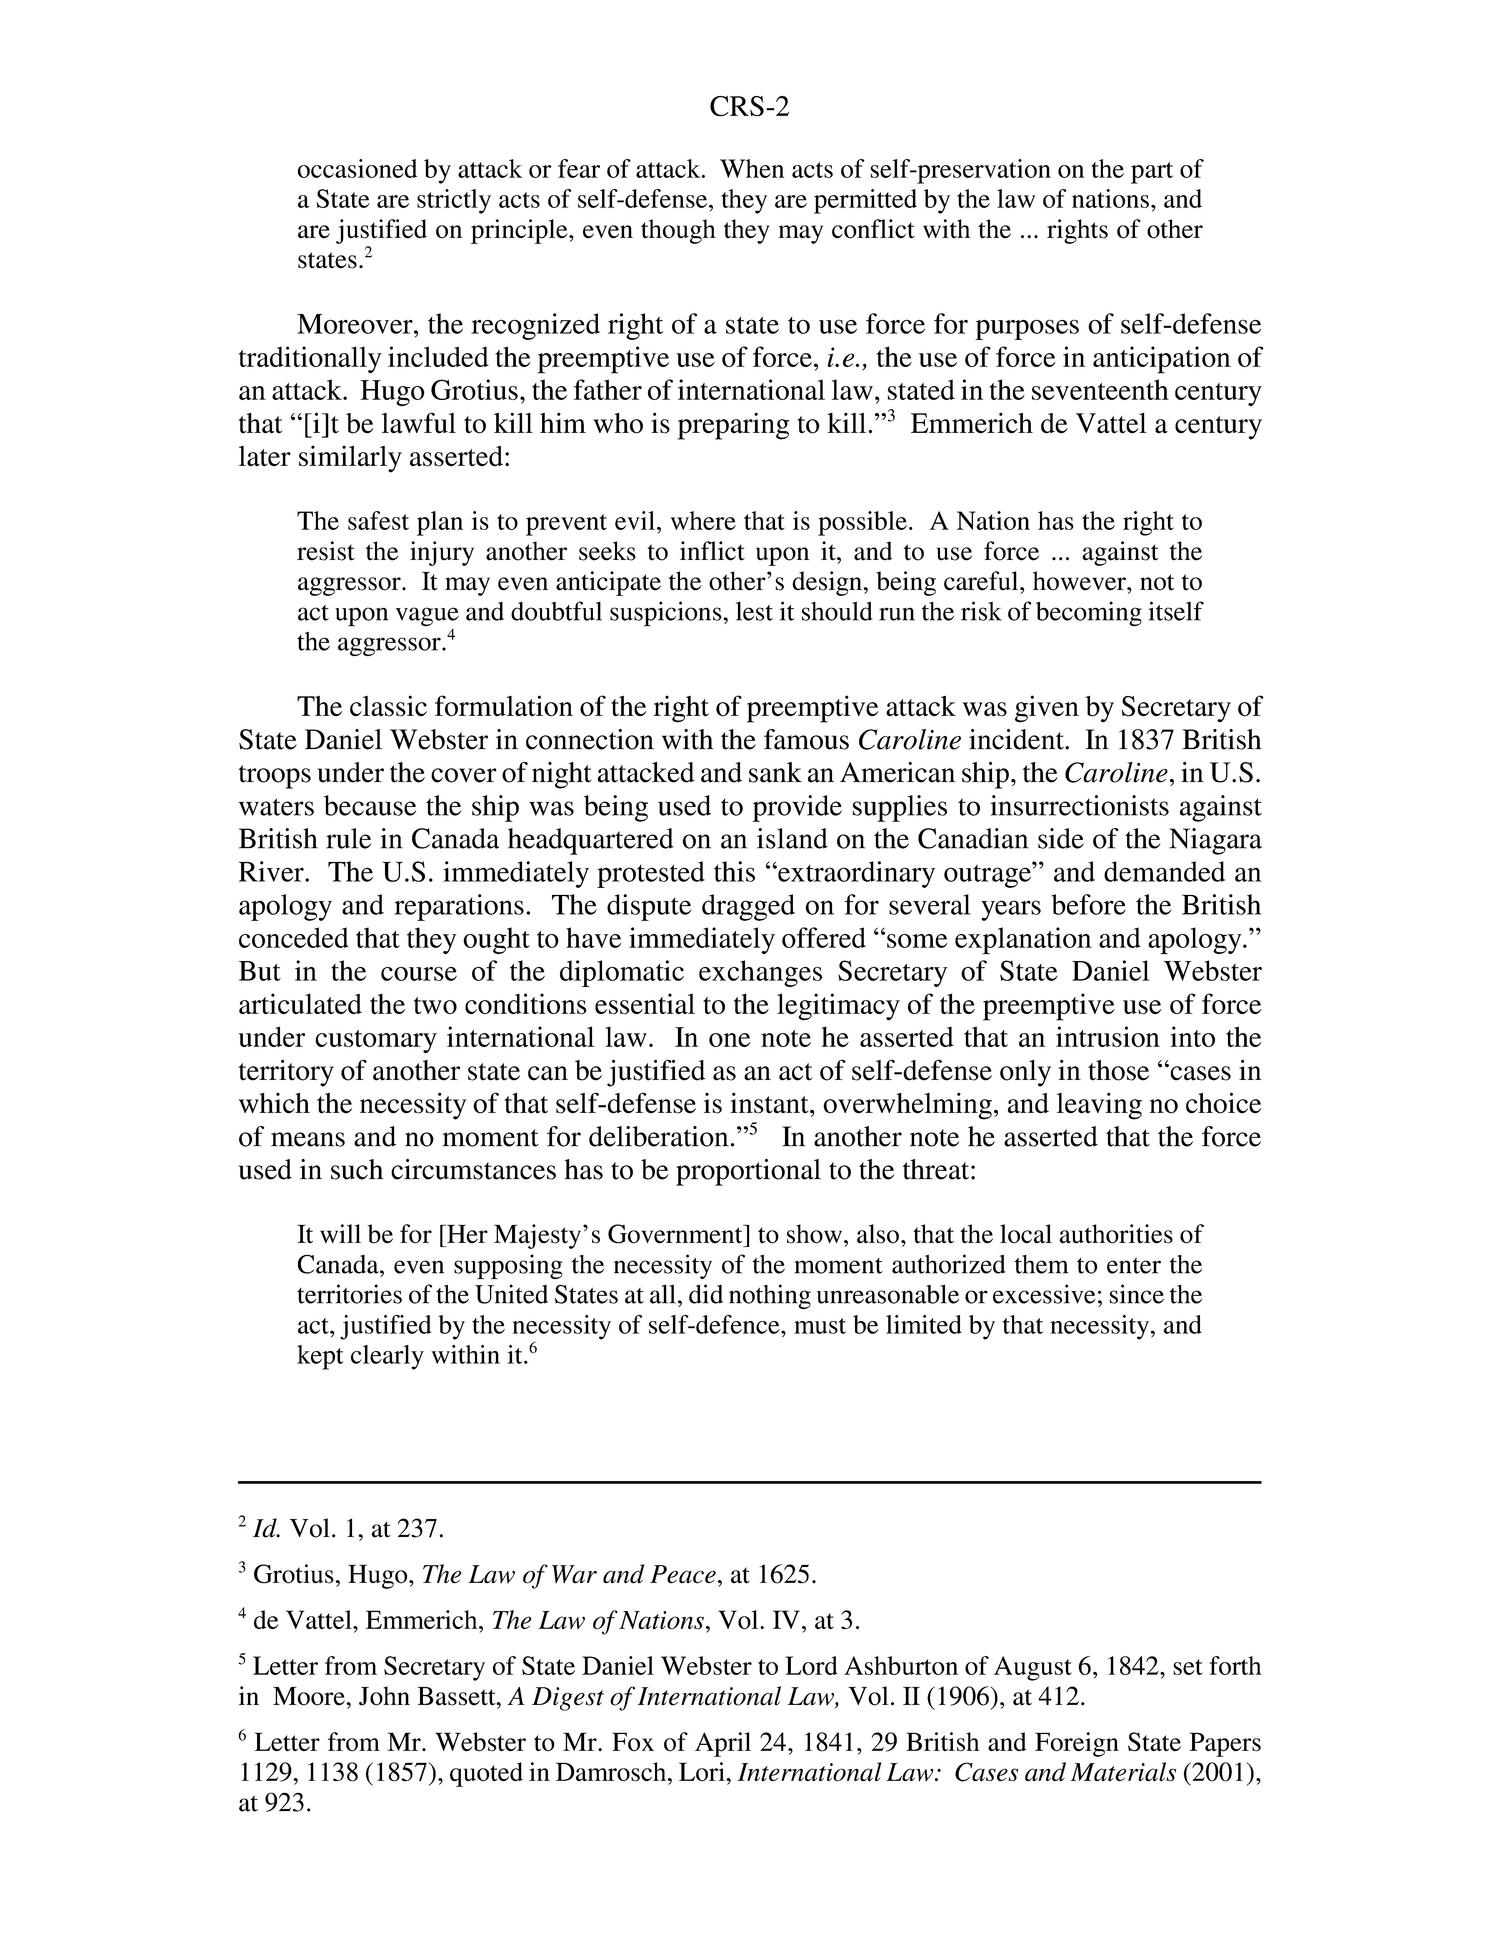 International Law and the Preemptive Use of Force Against Iraq
                                                
                                                    [Sequence #]: 2 of 6
                                                